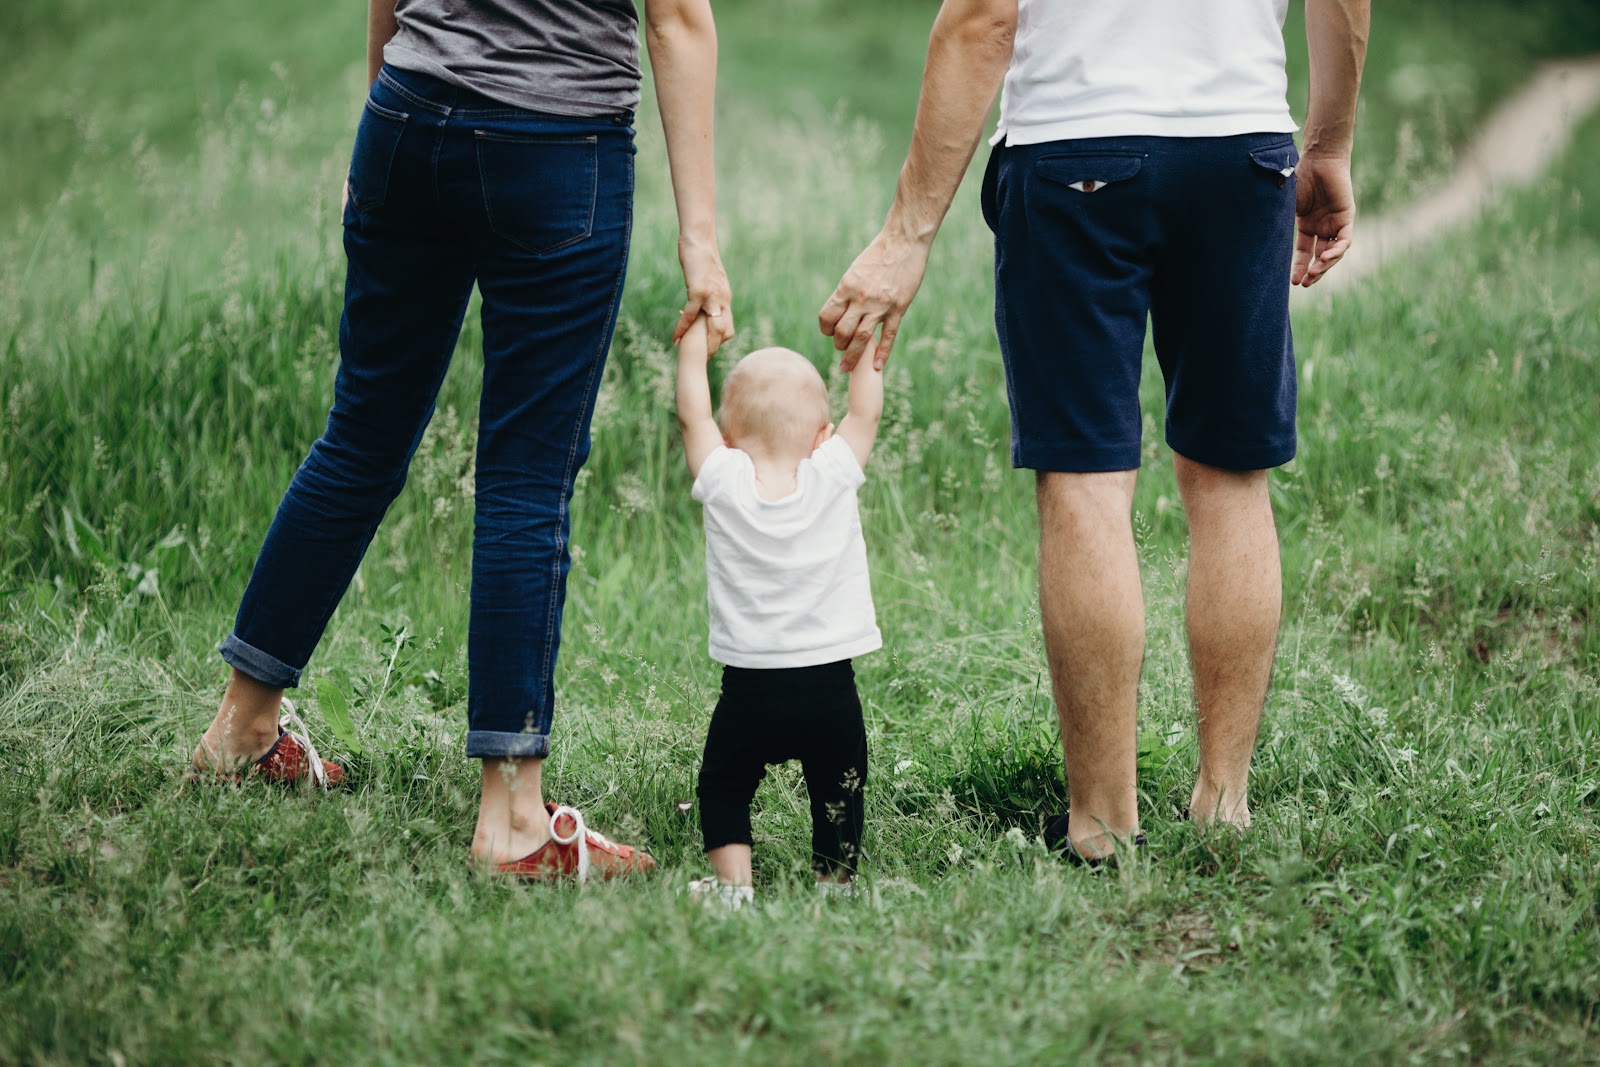 New family, mom, dad, and toddler walking through grassy field. Holding hands with new baby